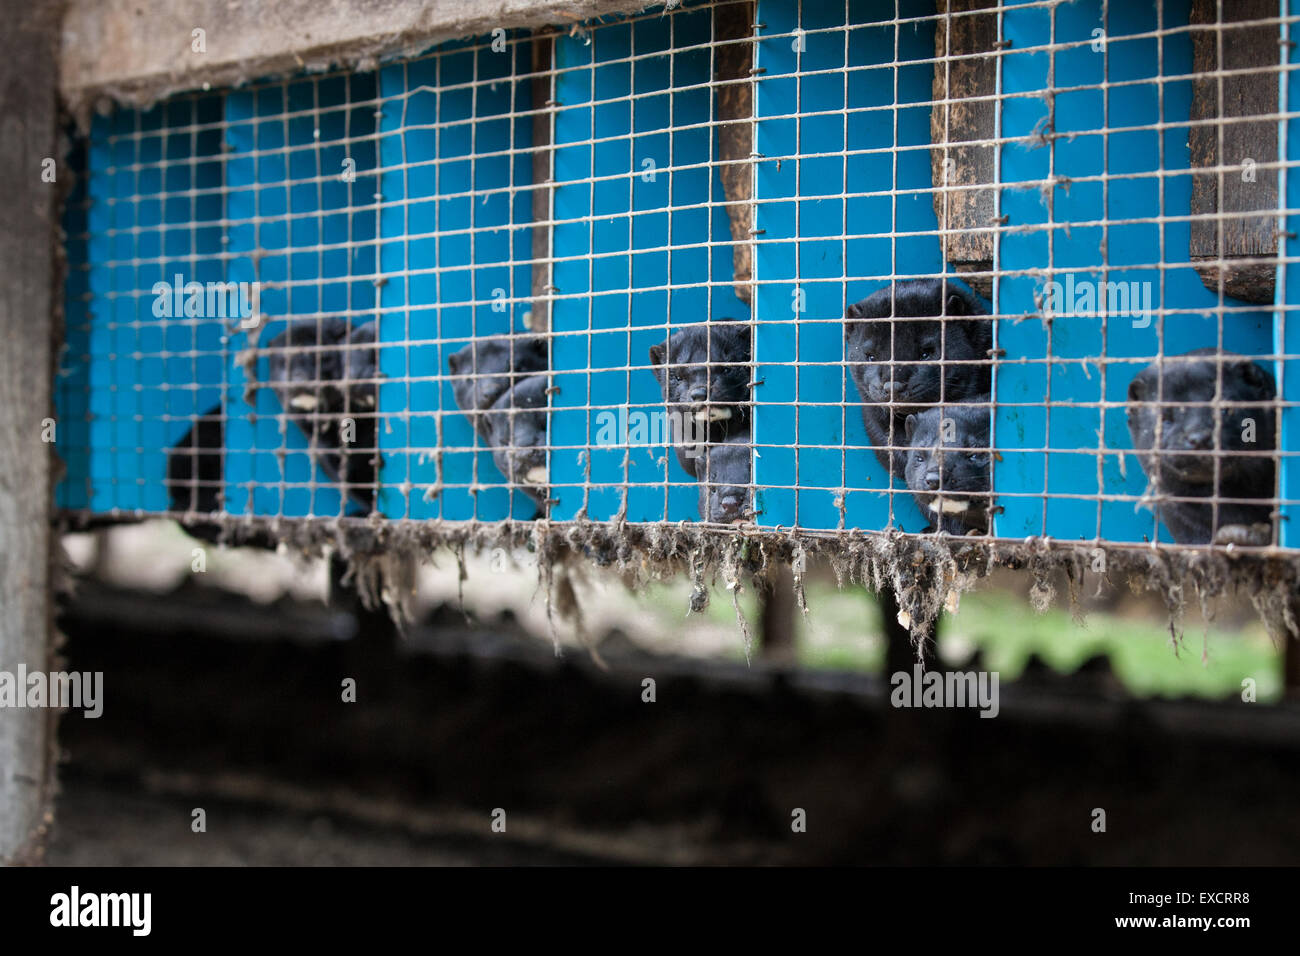 Black fur minks are raised at this mink farm in the Midwestern part of the United States. Stock Photo